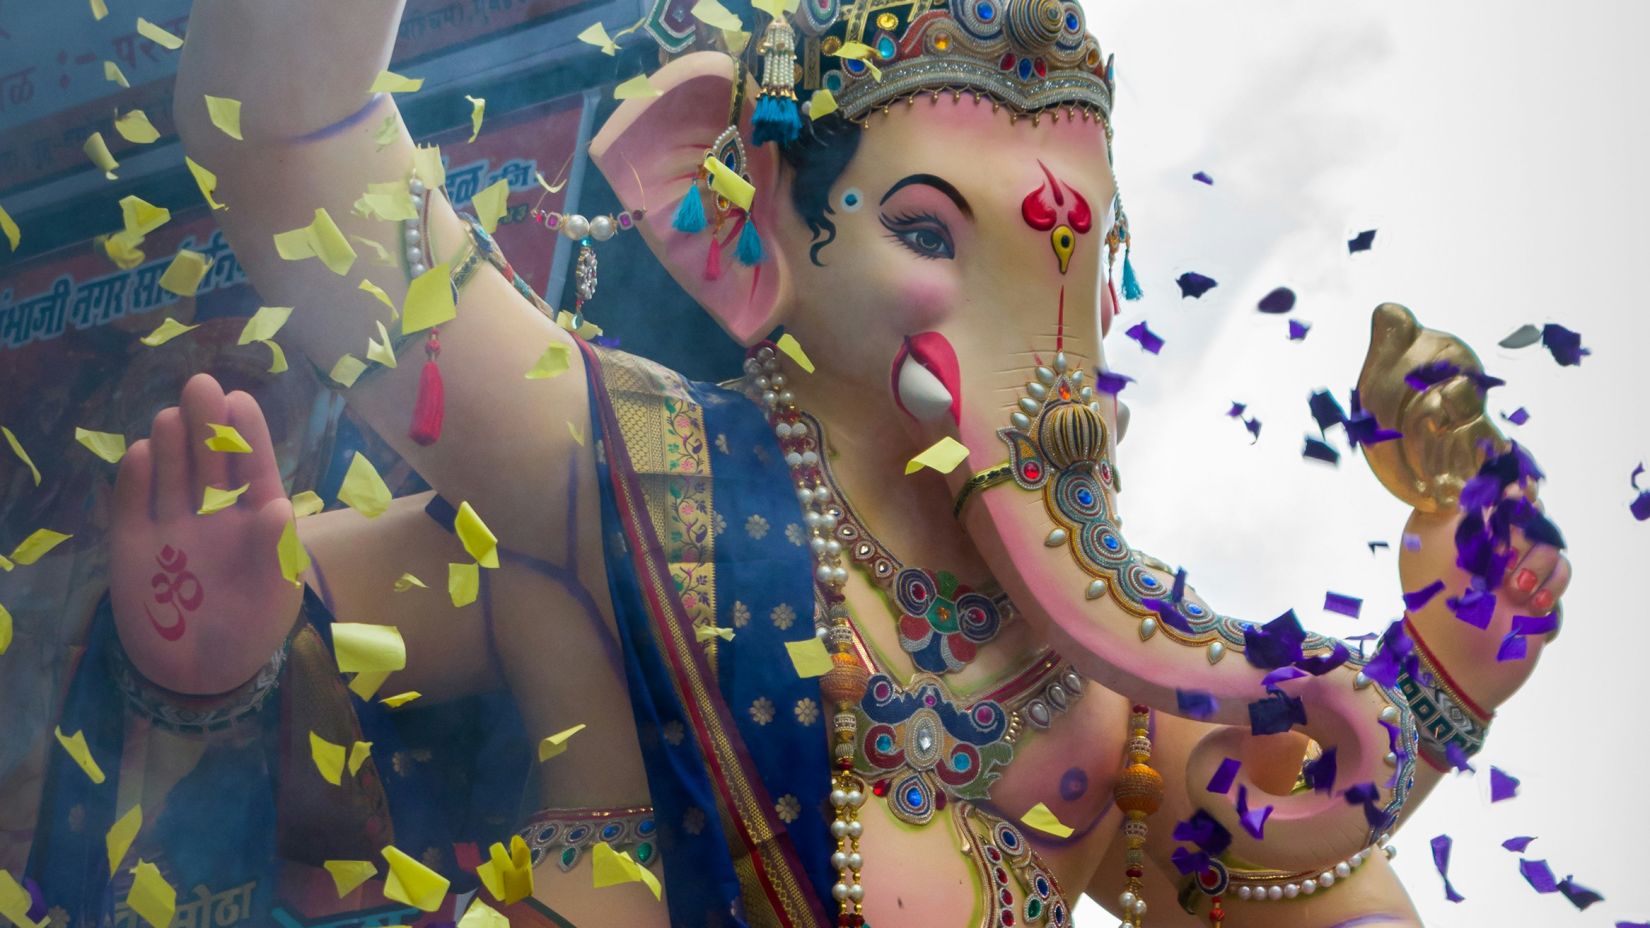 a ganesha's idol kept on a chariot while going for a visarjan with colours being thrown on it